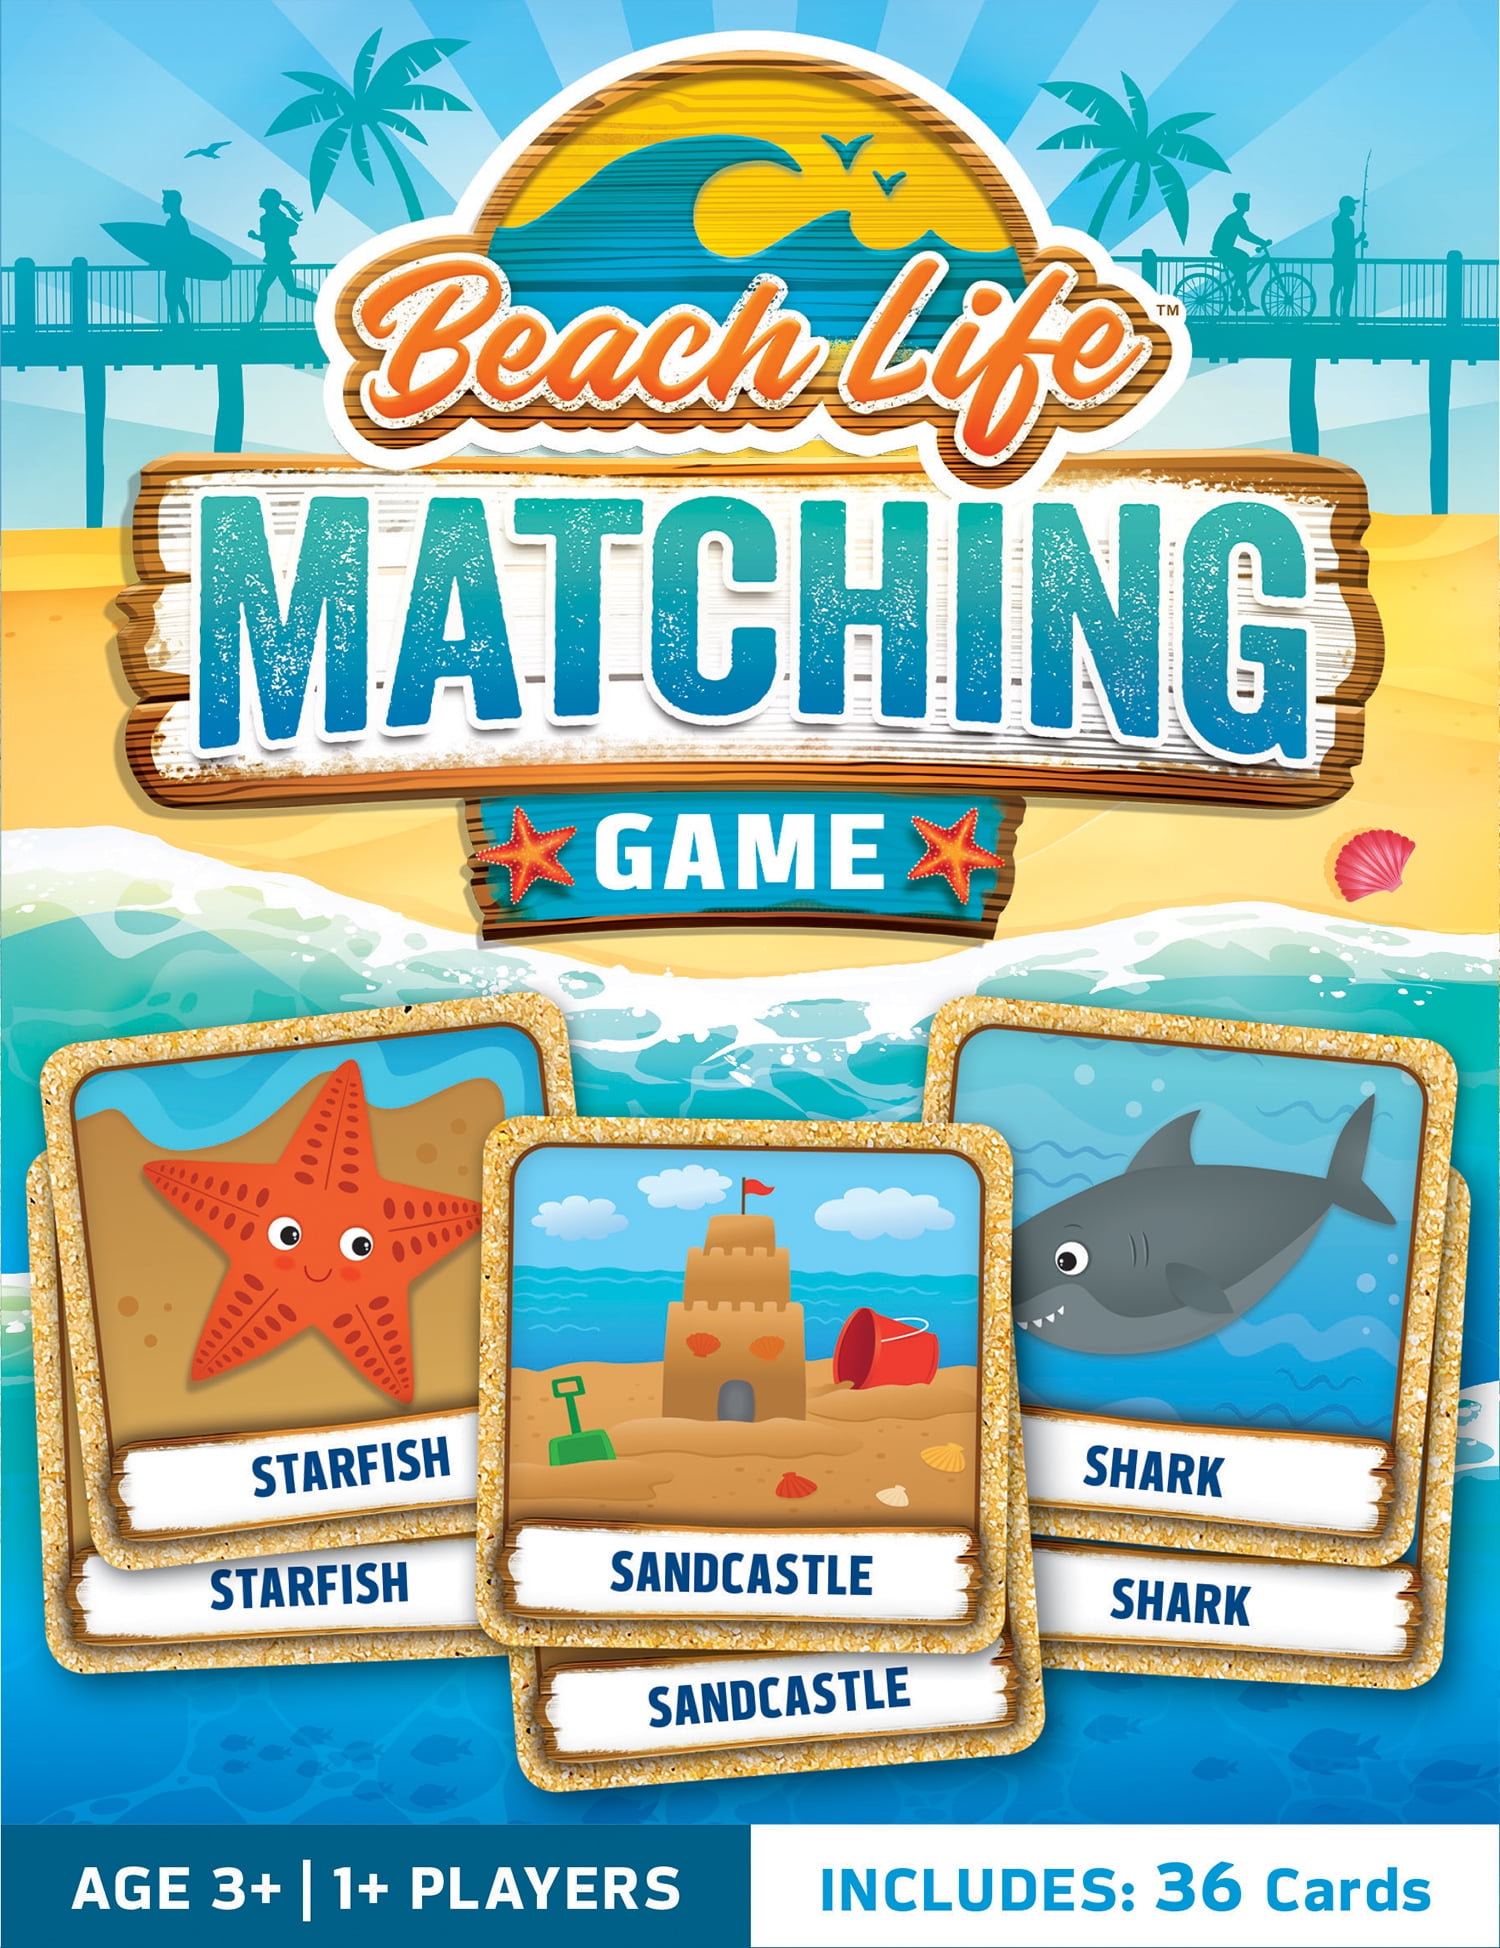 MasterPieces Licensed Kids Games - Beach Life - Seagull Poop Card Game for  Kids & Family